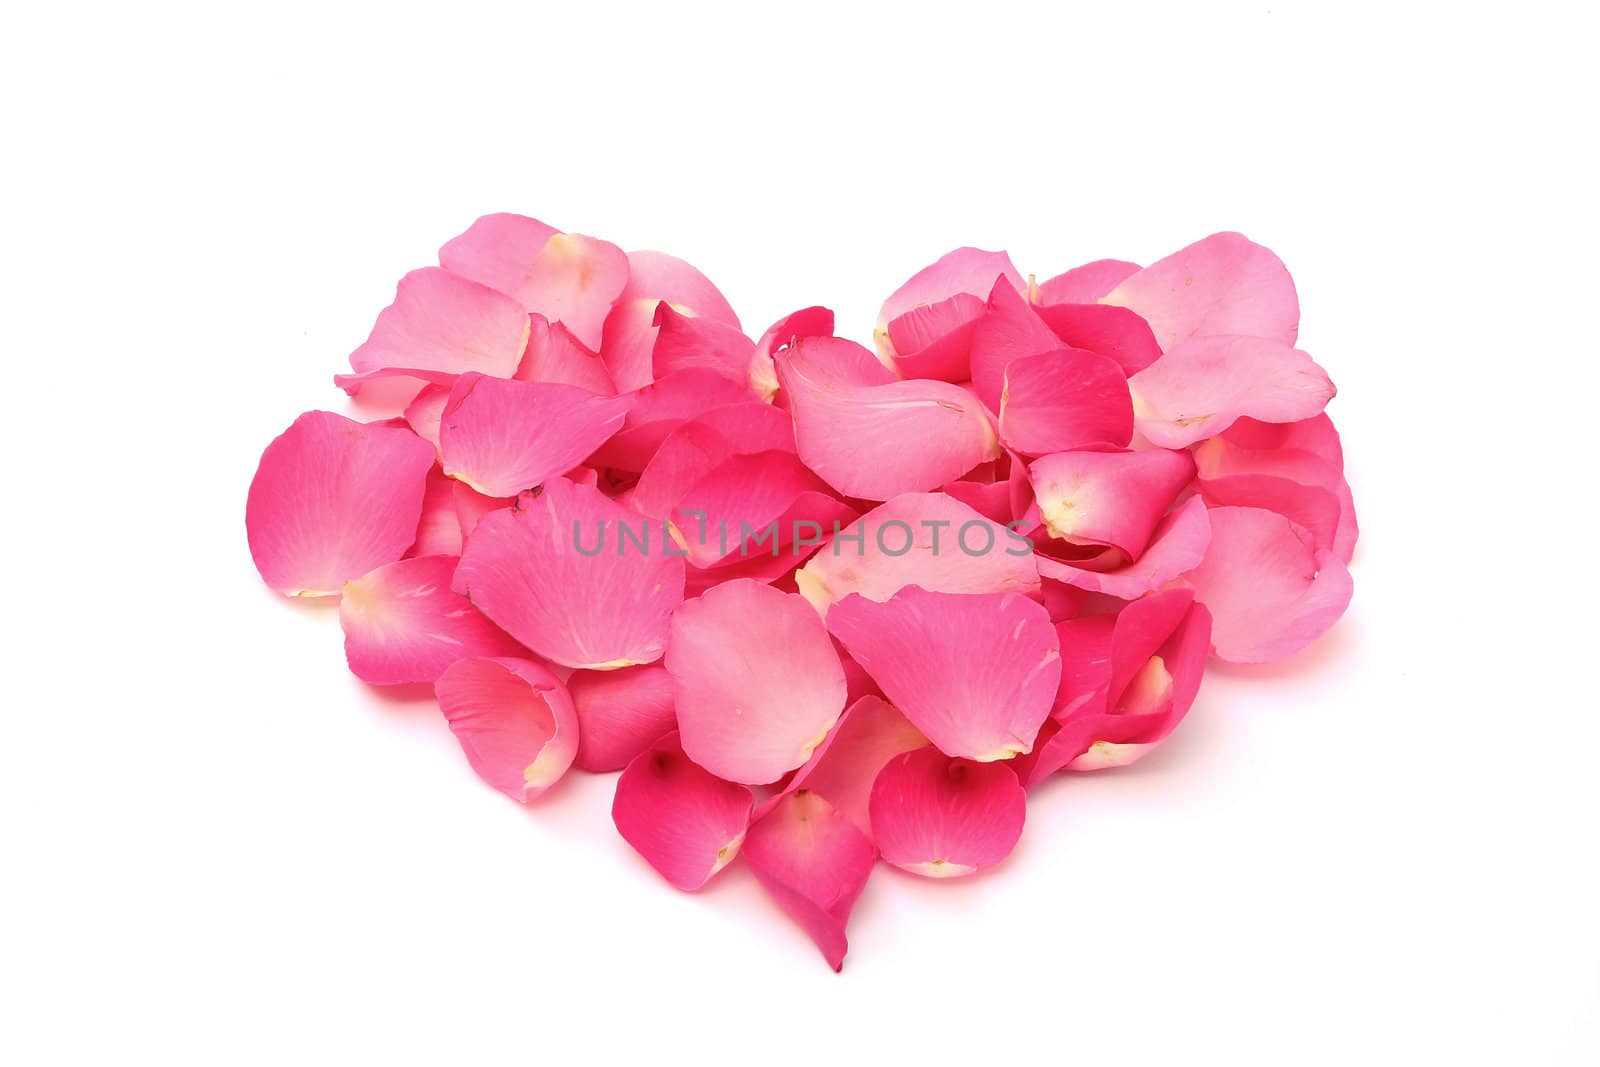 Rose petals in a form of heart on white background